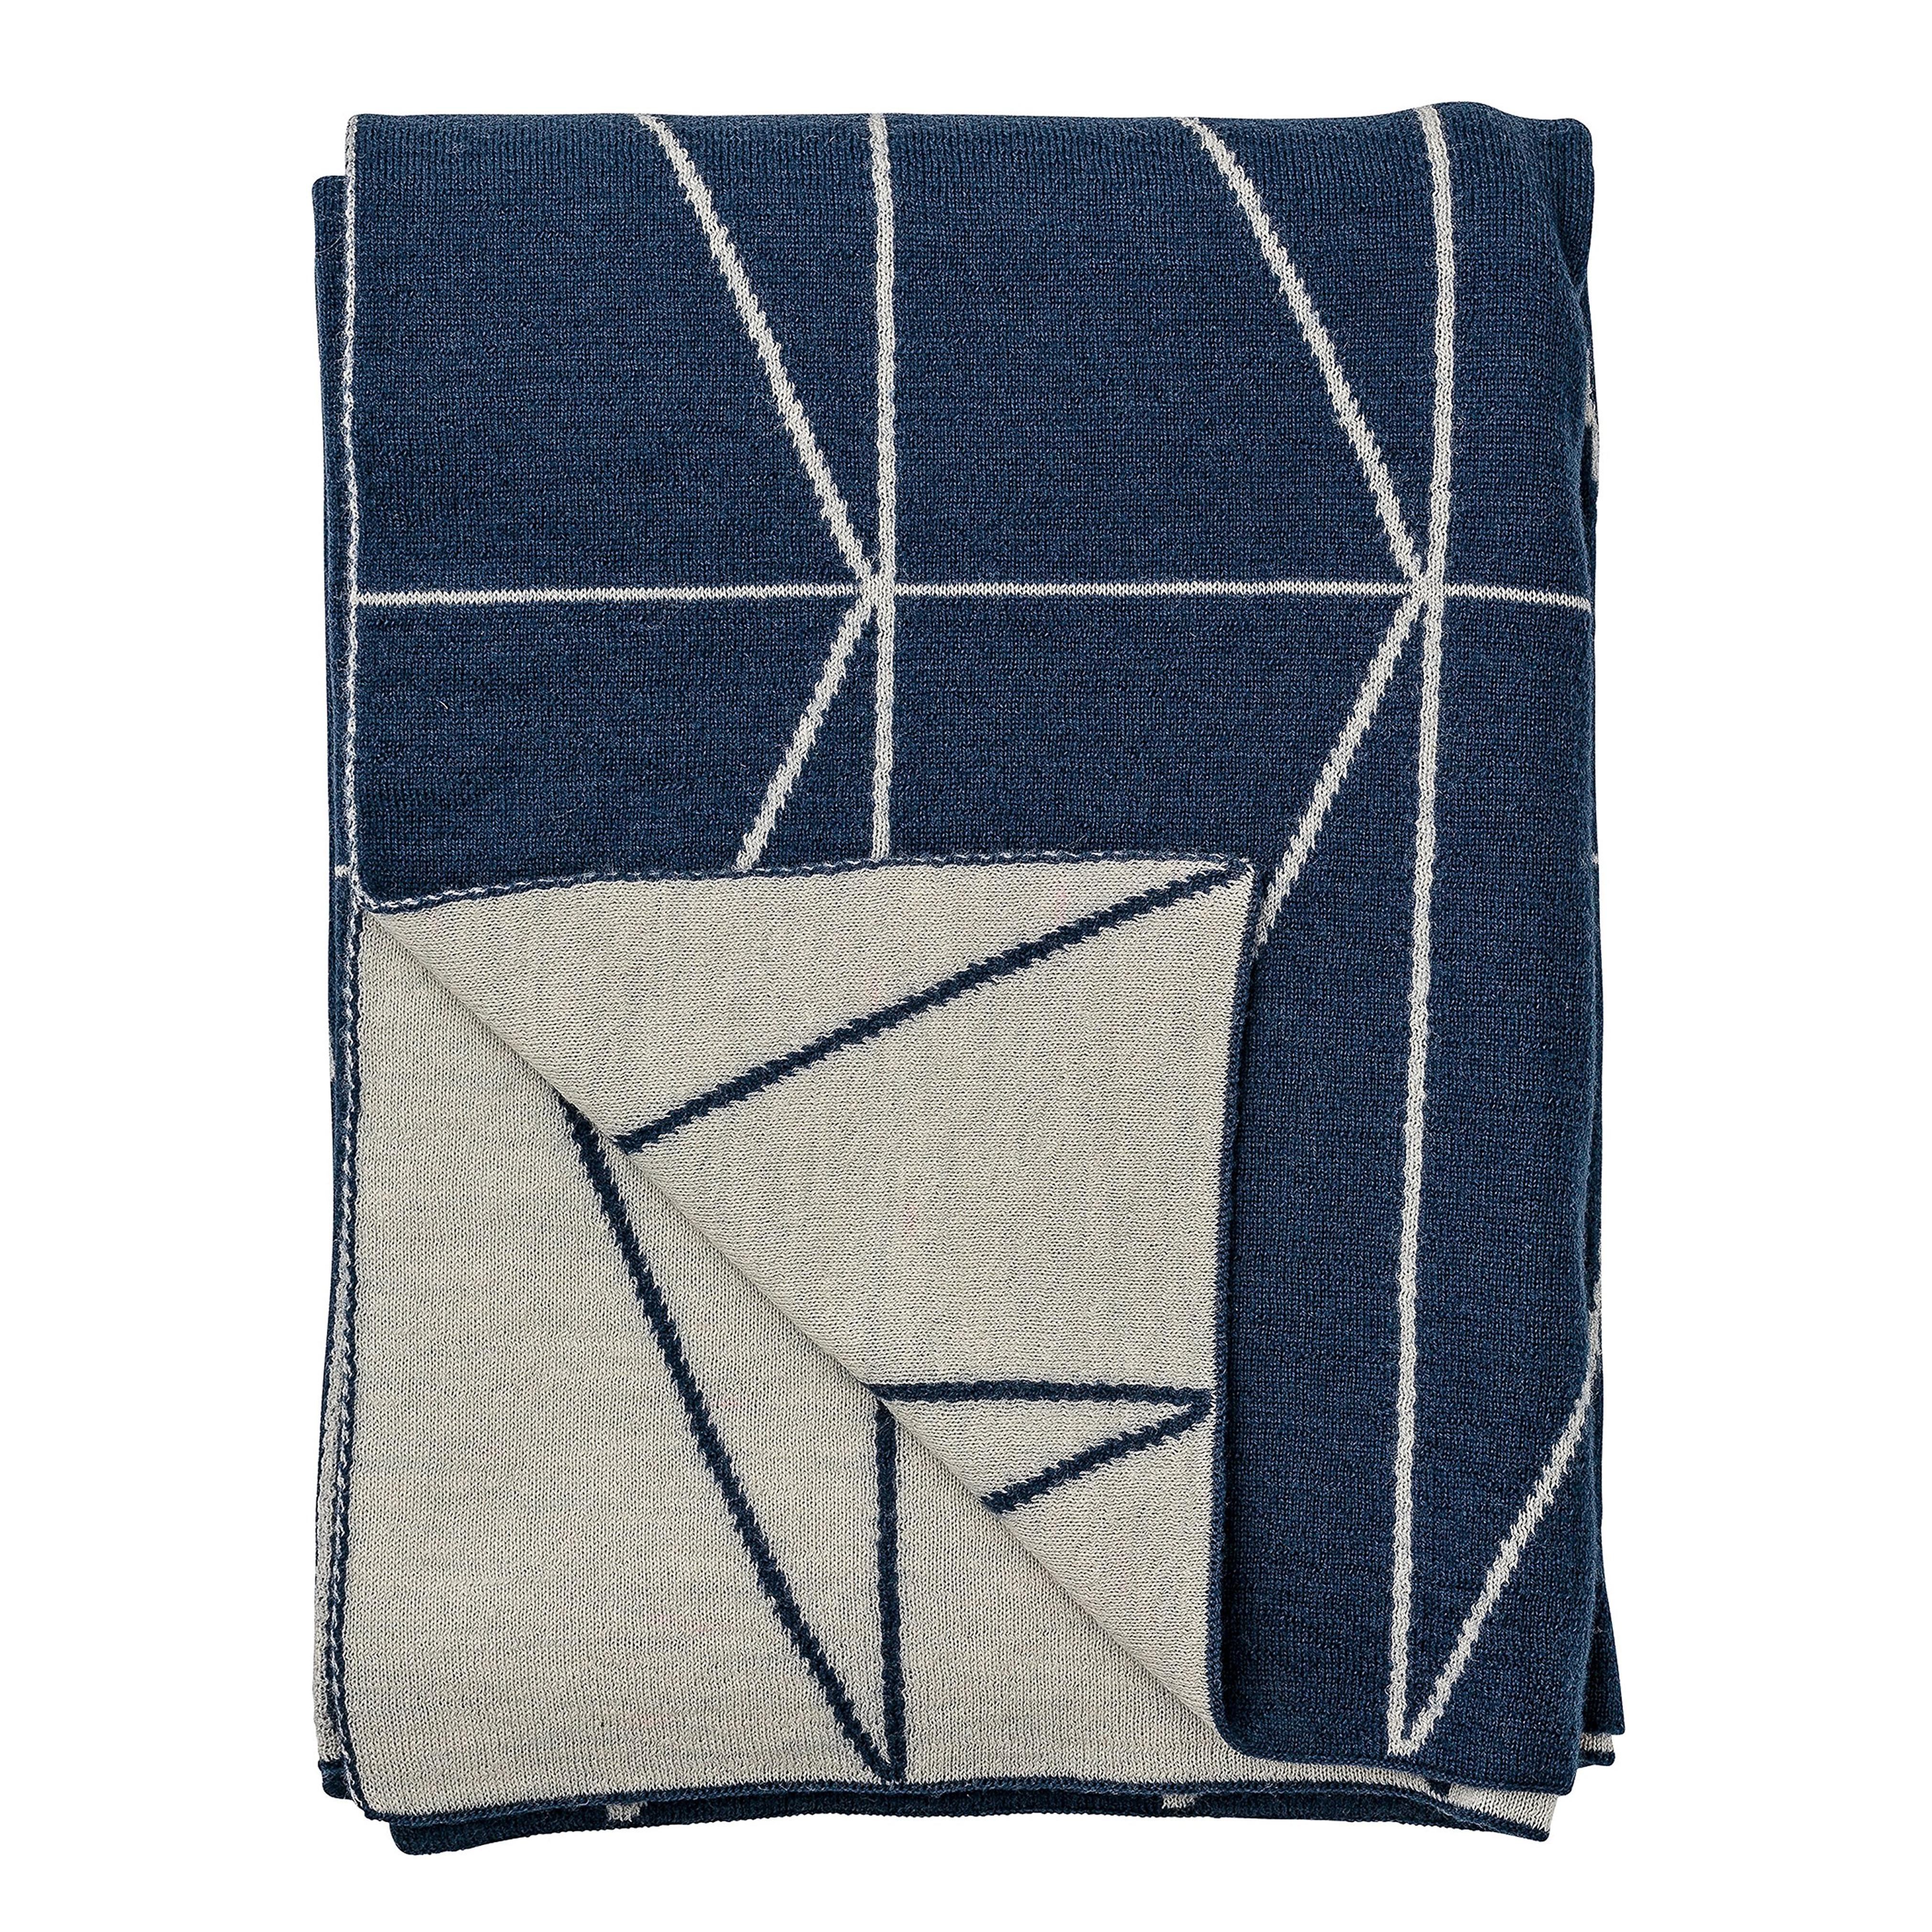 Indigo Blue and Light Grey Knitted Wool Throw with Zig Zag Print